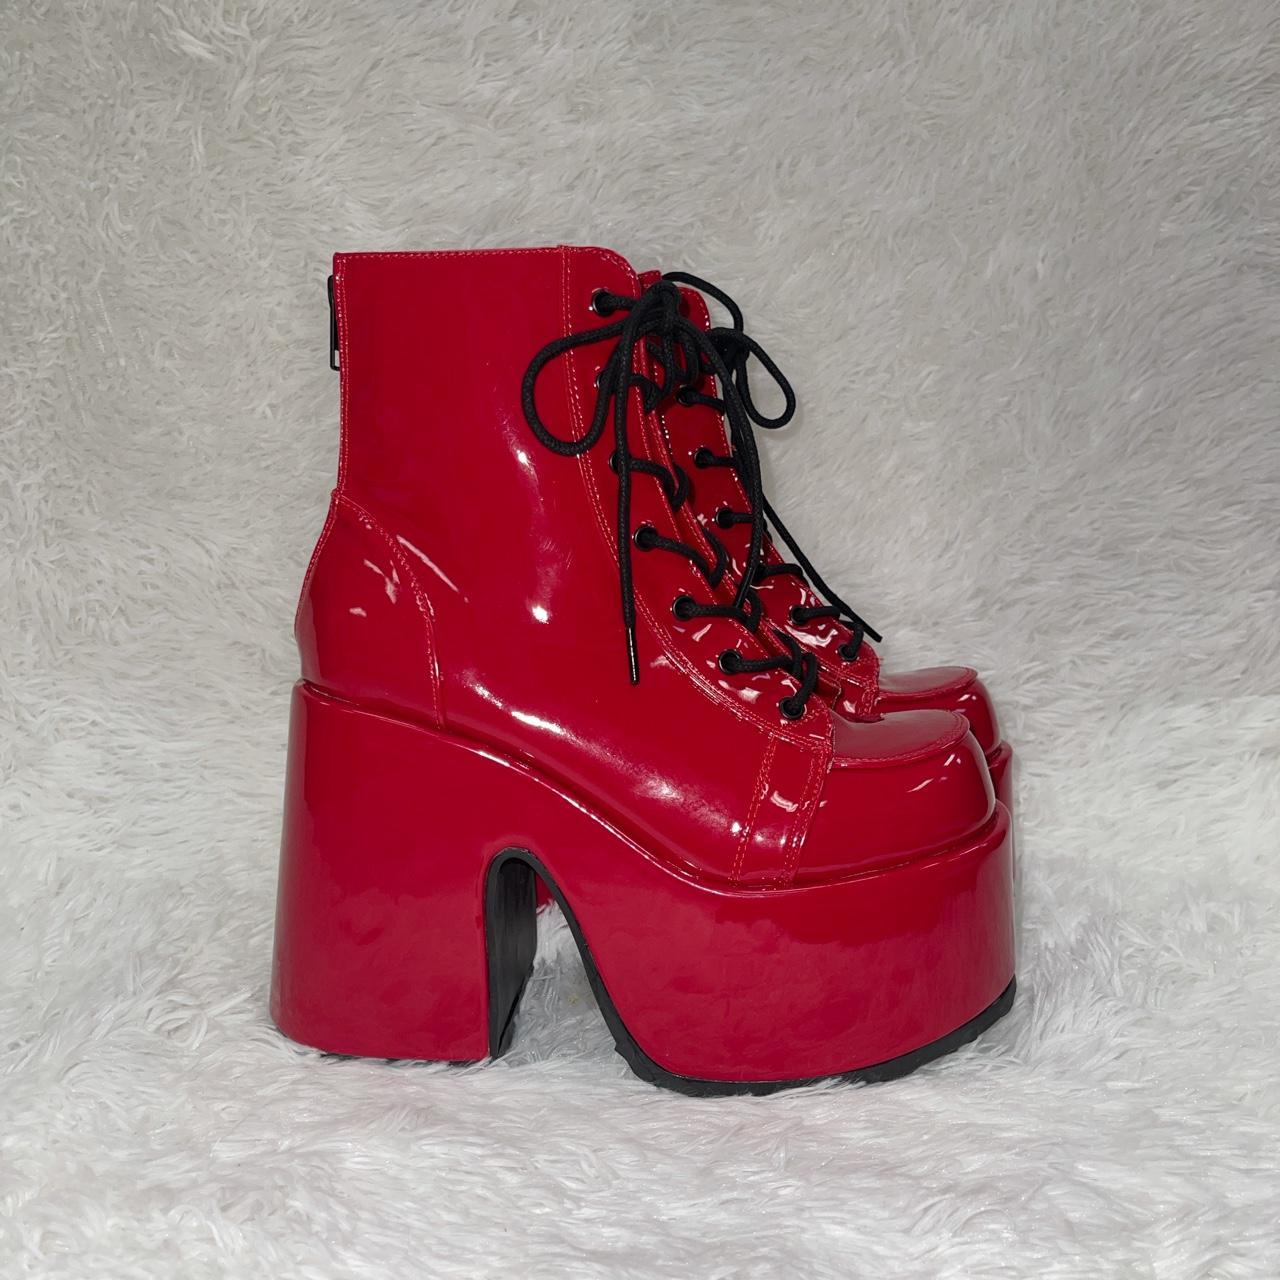 DEMONIA Camel-203 Boots - Red Patent